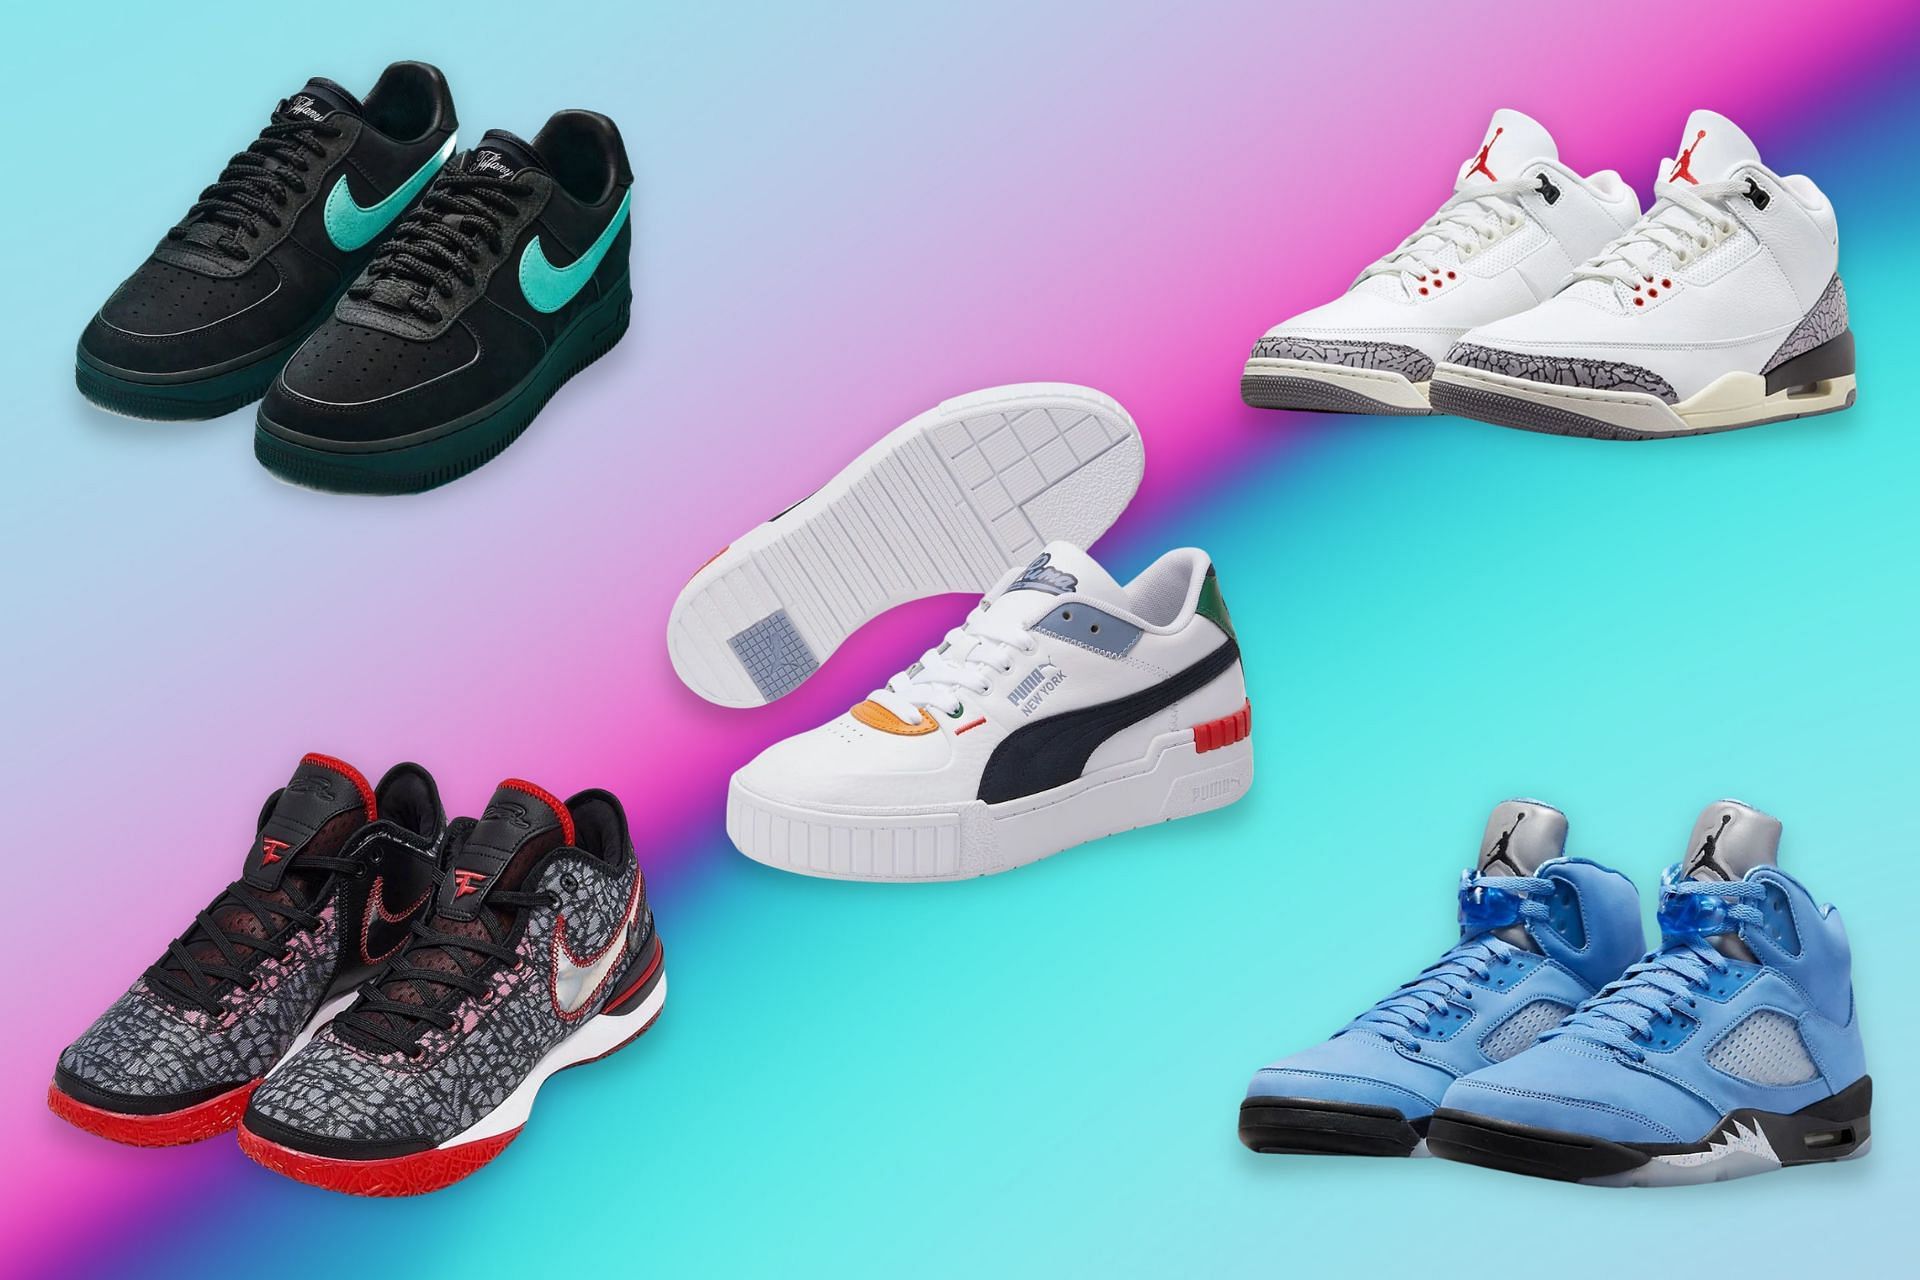 File heritage Low nike: 5 best sneaker releases of March 2023